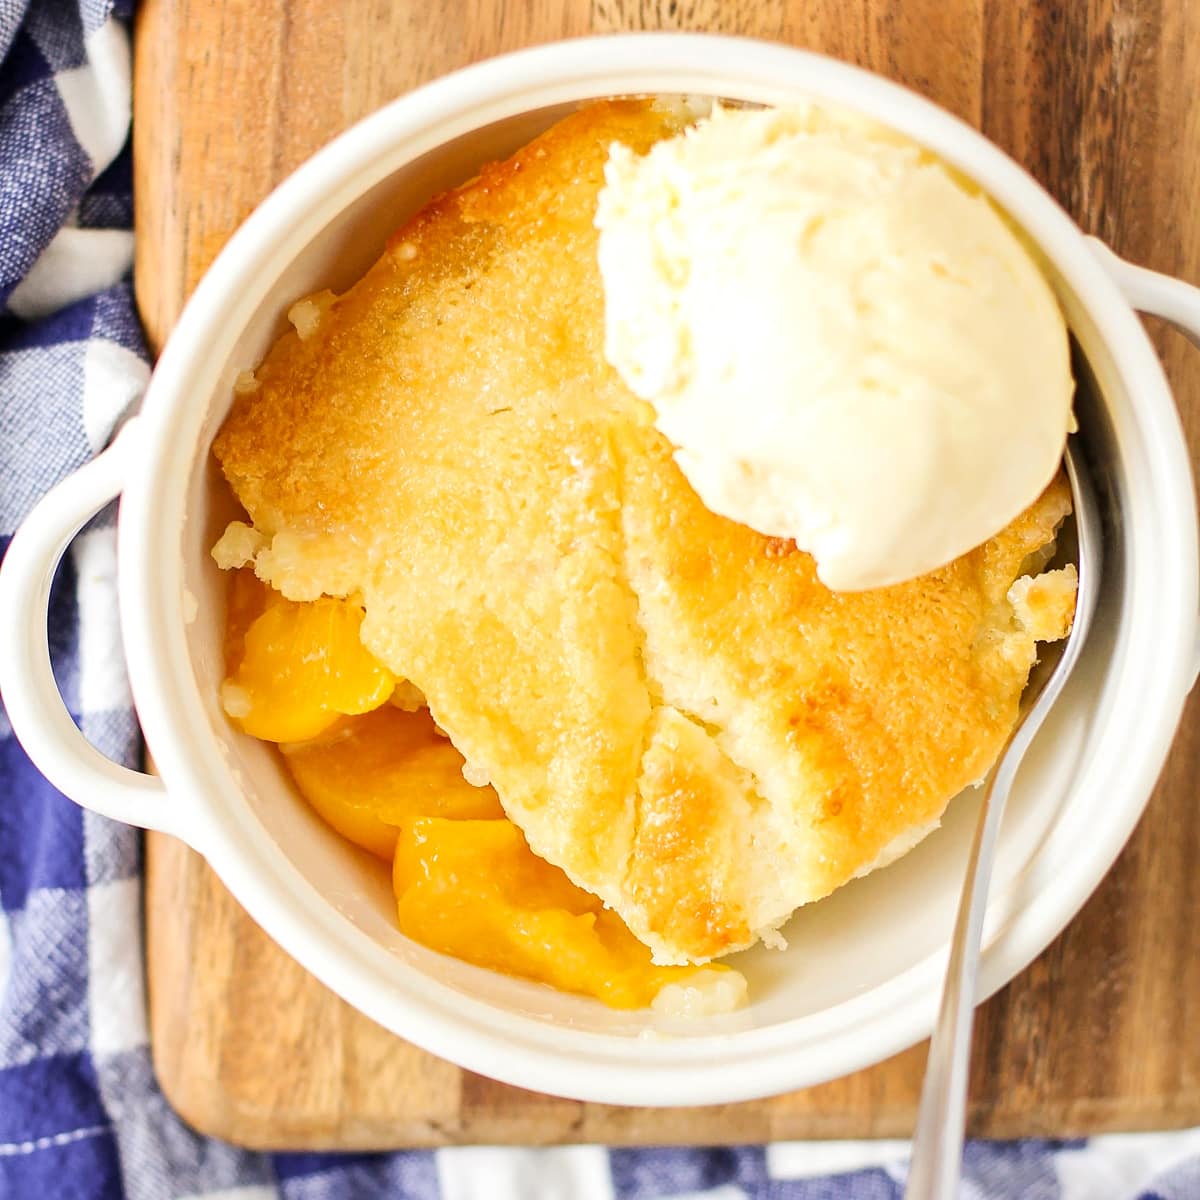 Easy peach cobbler recipe close up image with ice cream on top.